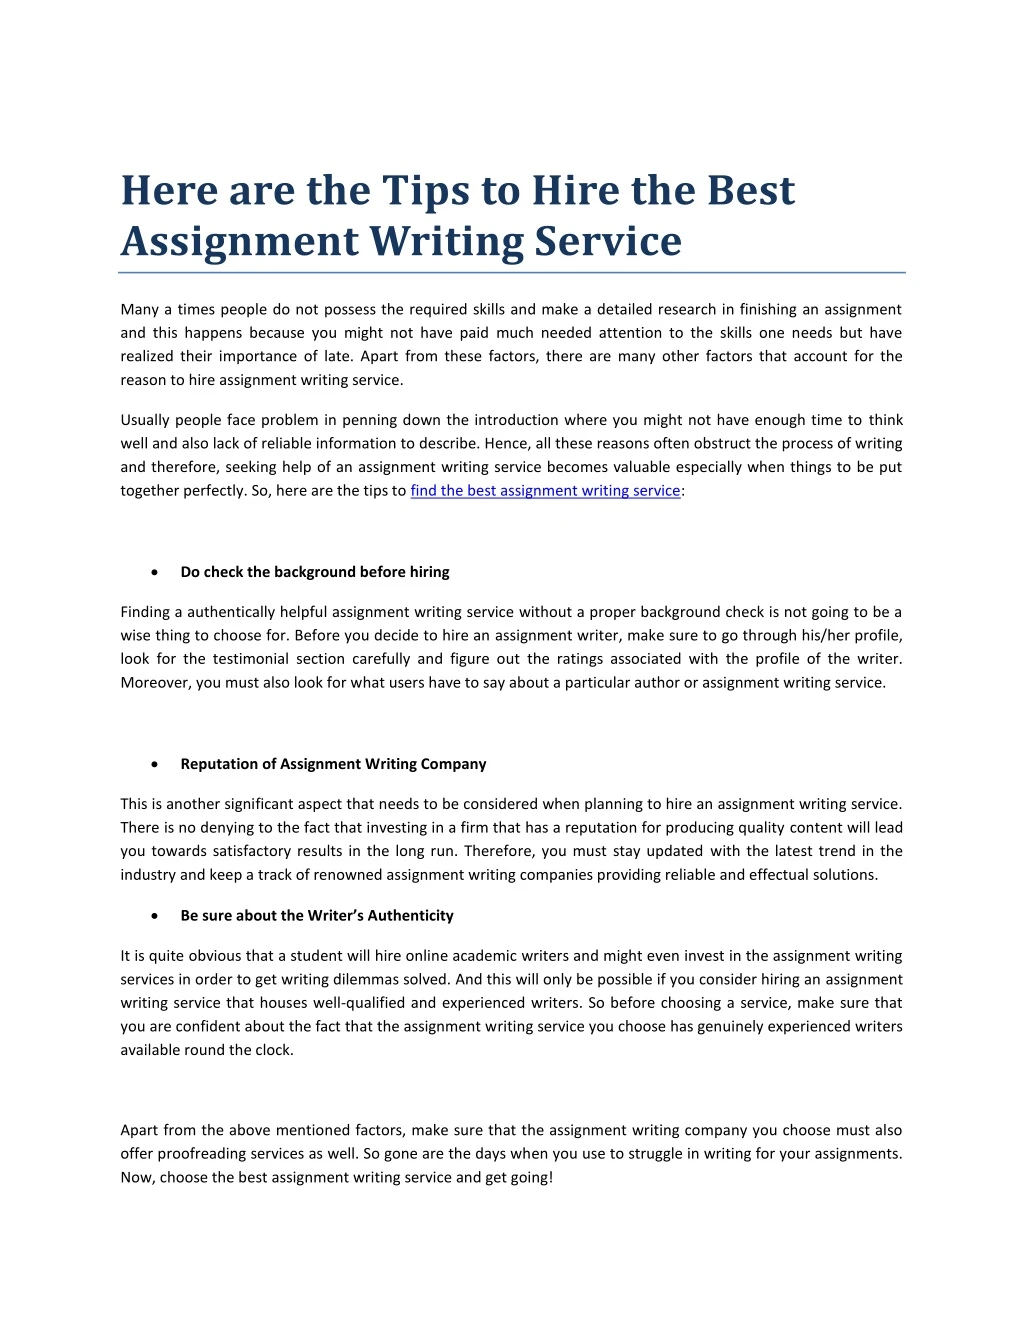 here are the tips to hire the best assignment